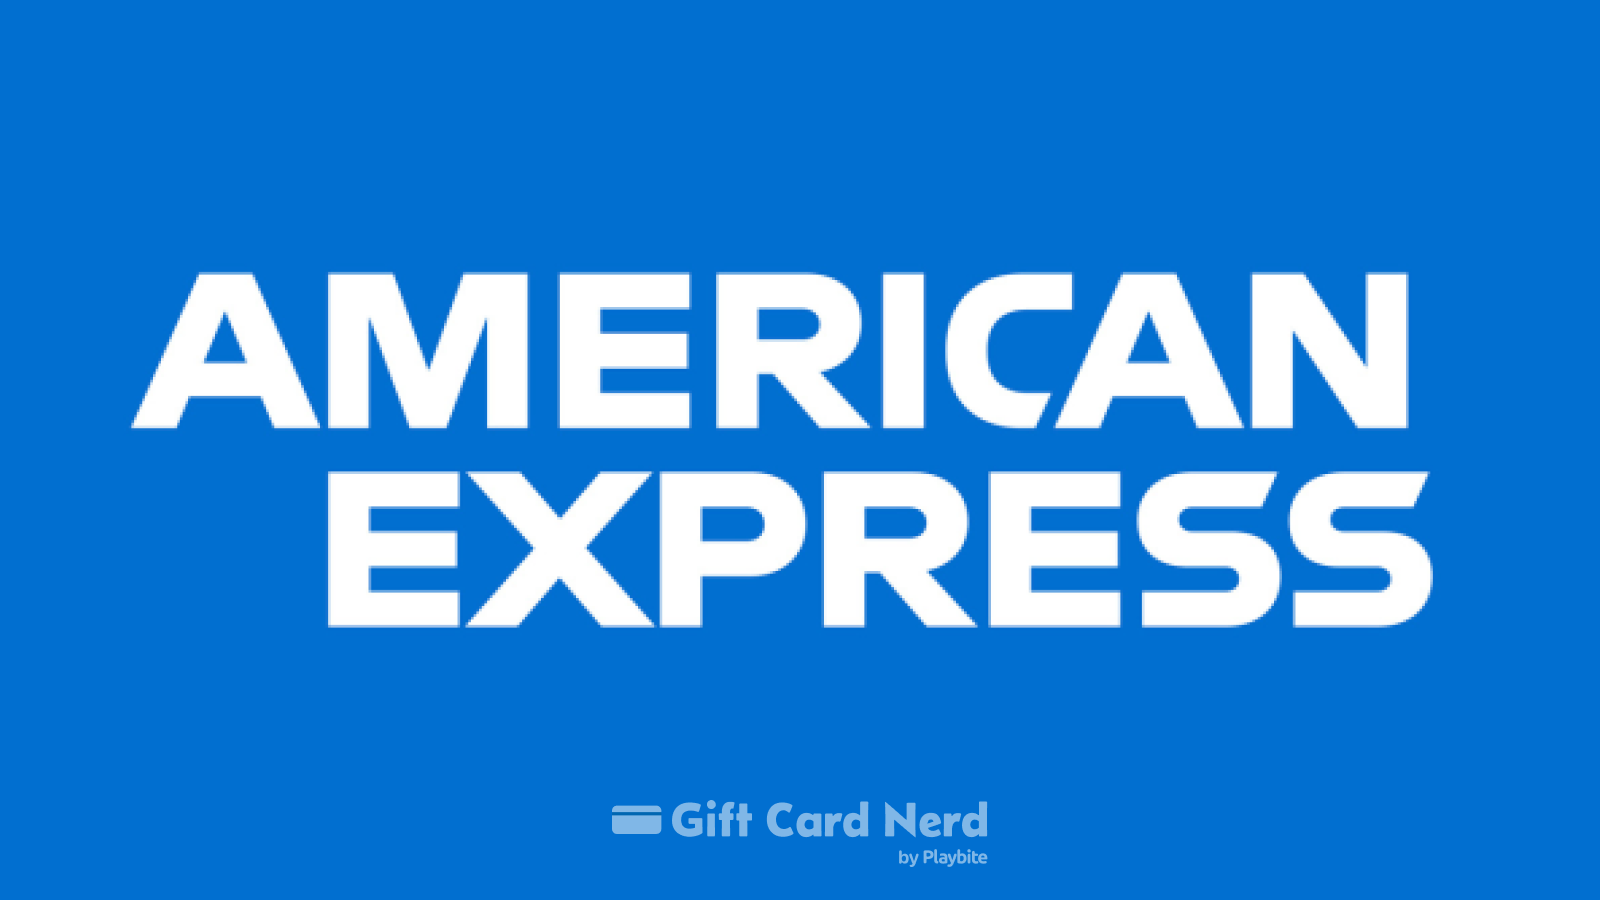 Does Game Stop Sell Amex Gift Cards?